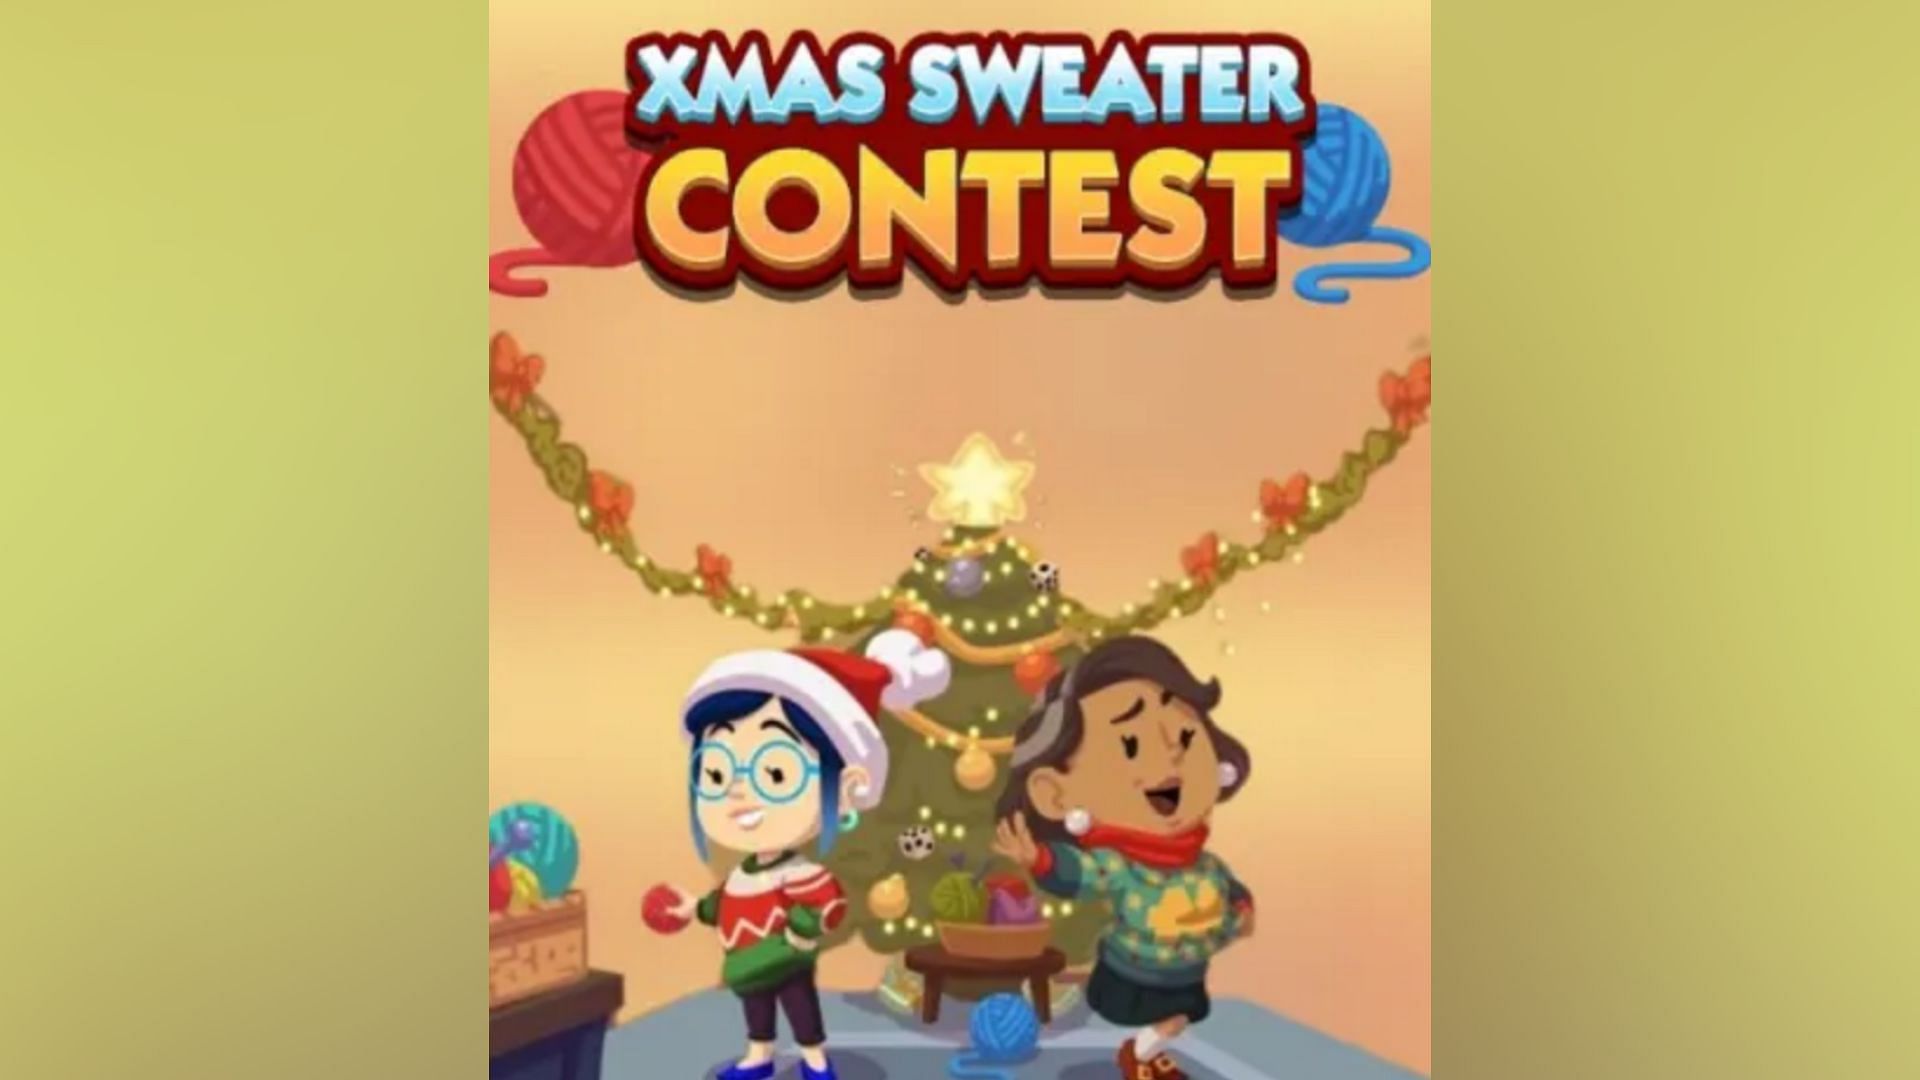 Xmas Sweater Contest tournament is live in Monopoly Go (Image via Scopely) 